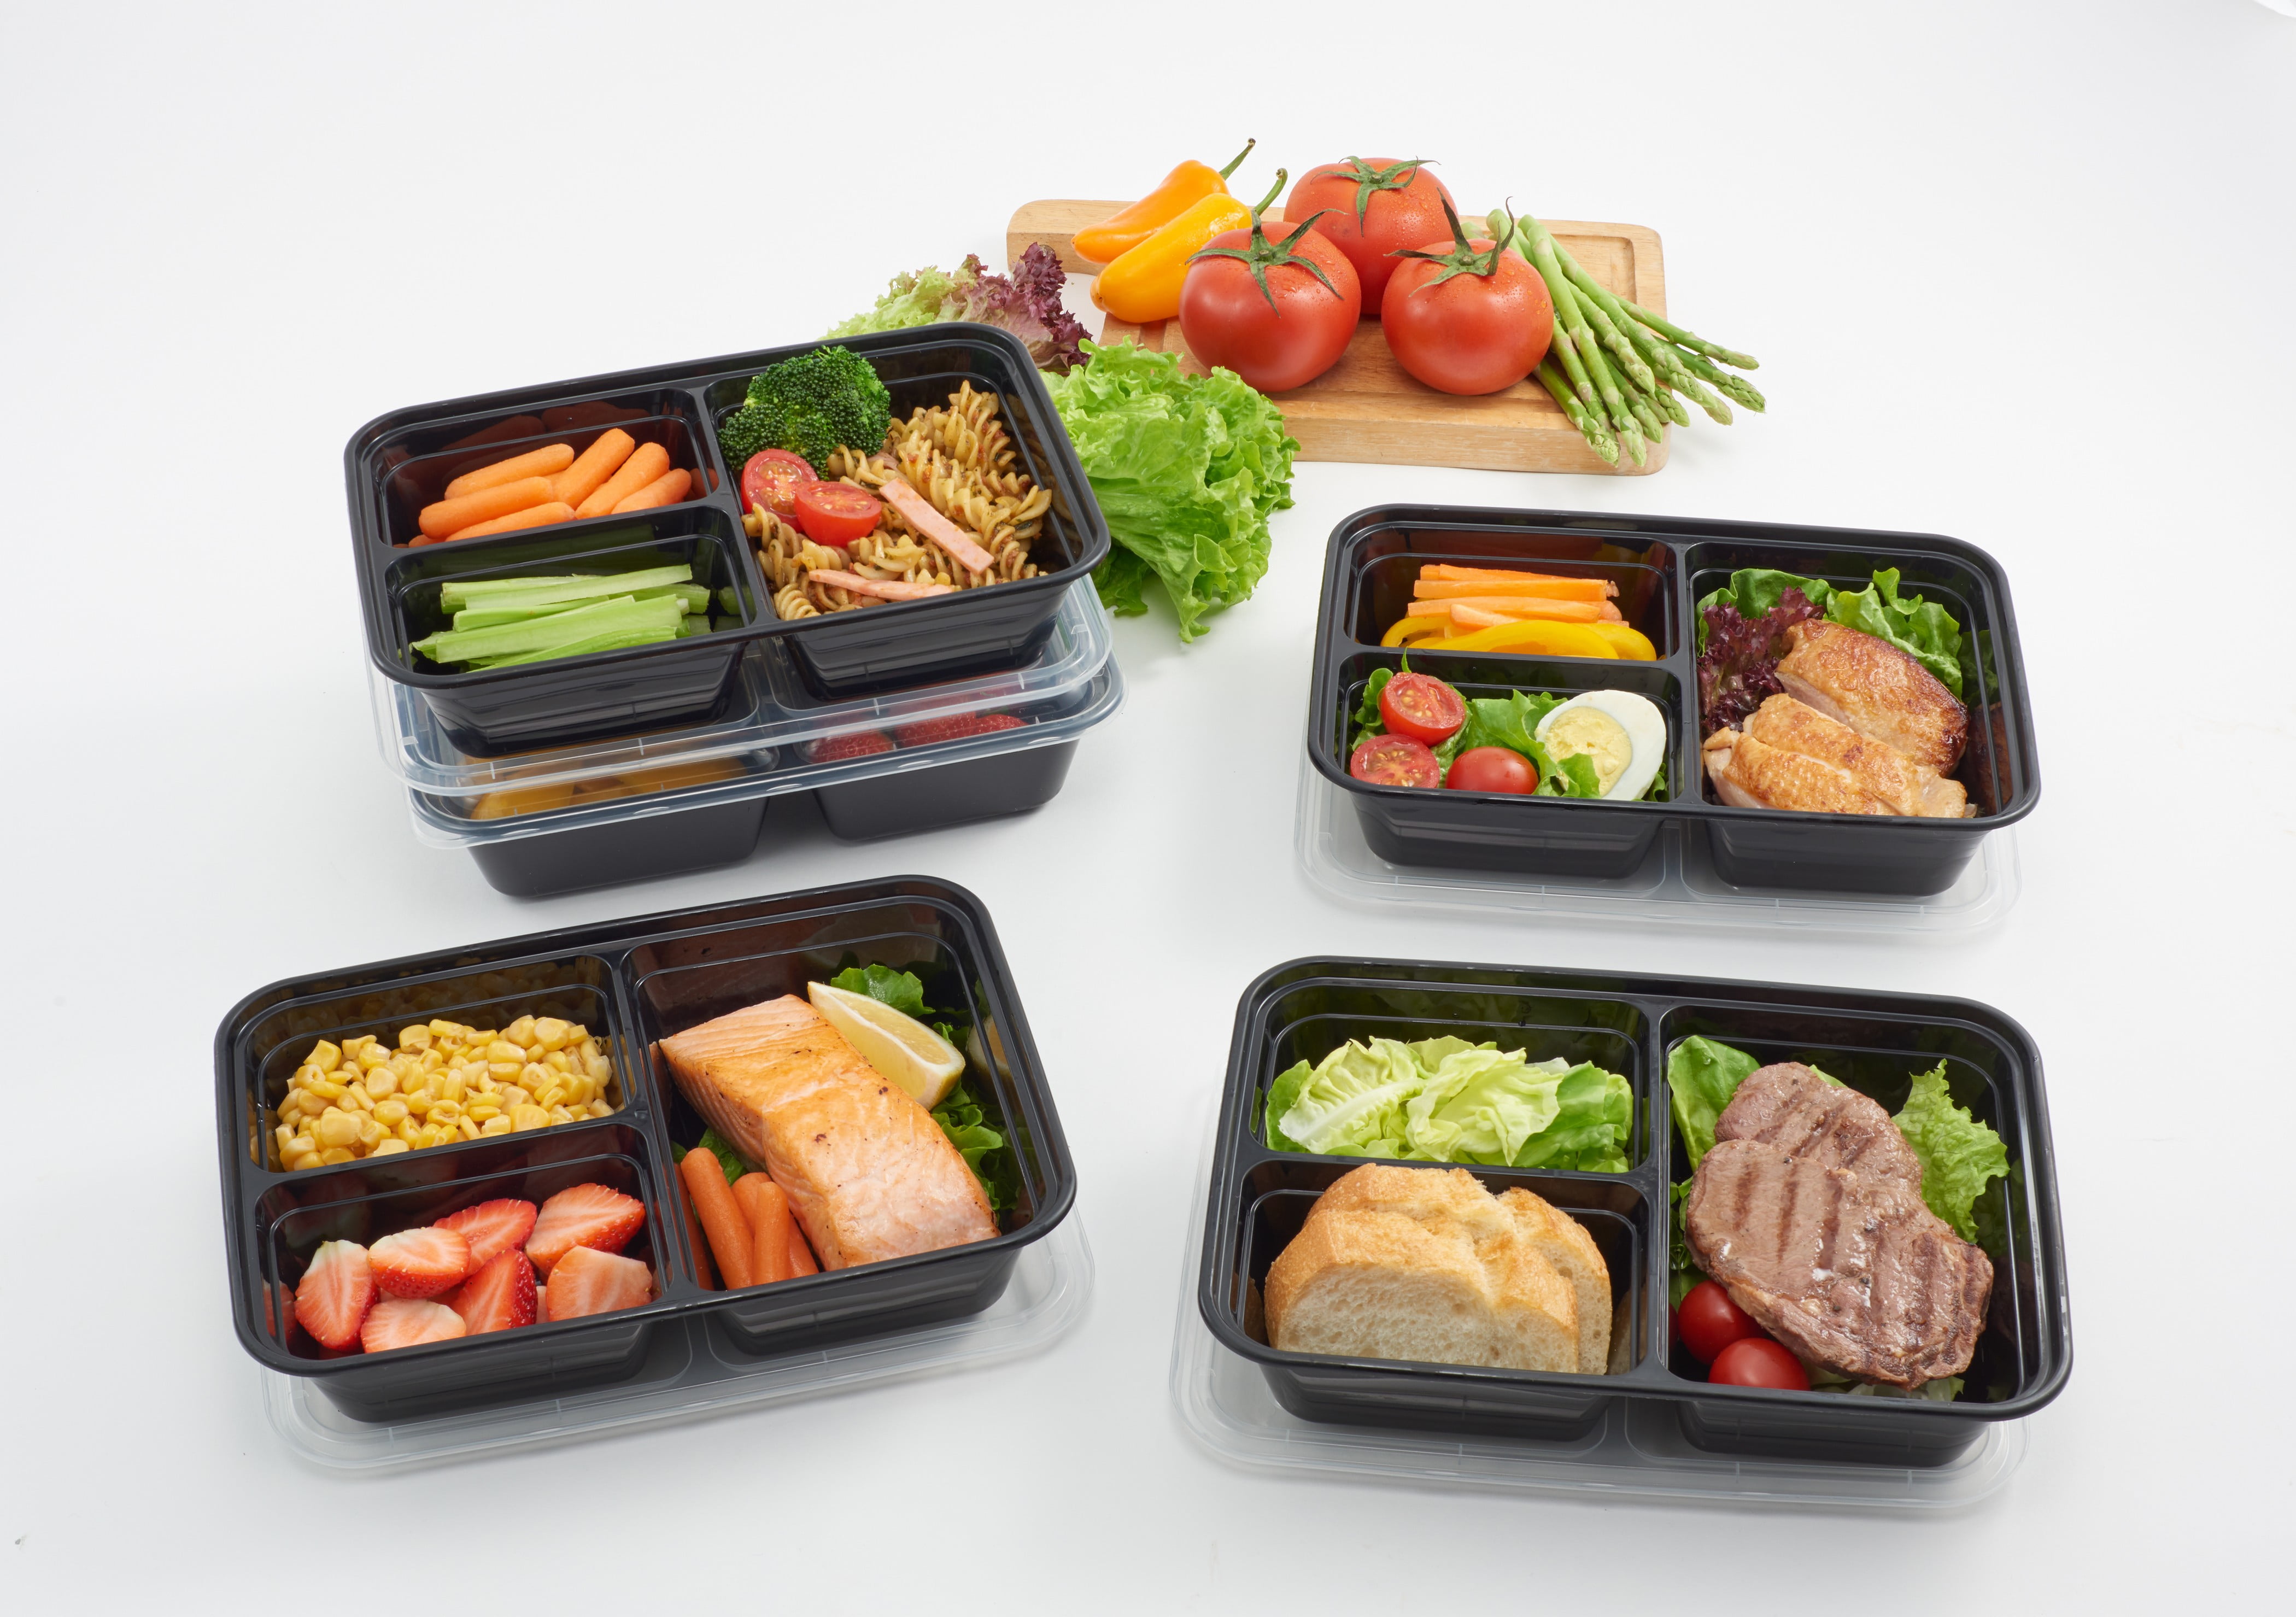 50 Pack 24oz Fried Chicken Wing Meal Prep Containers with Lids Microwave/Freezer Safe BPA Free To Go Bento Box for Pasta/Steak Sushi Tray in Restaurant/Supermarket/Catering/BBQ/Party Stackable